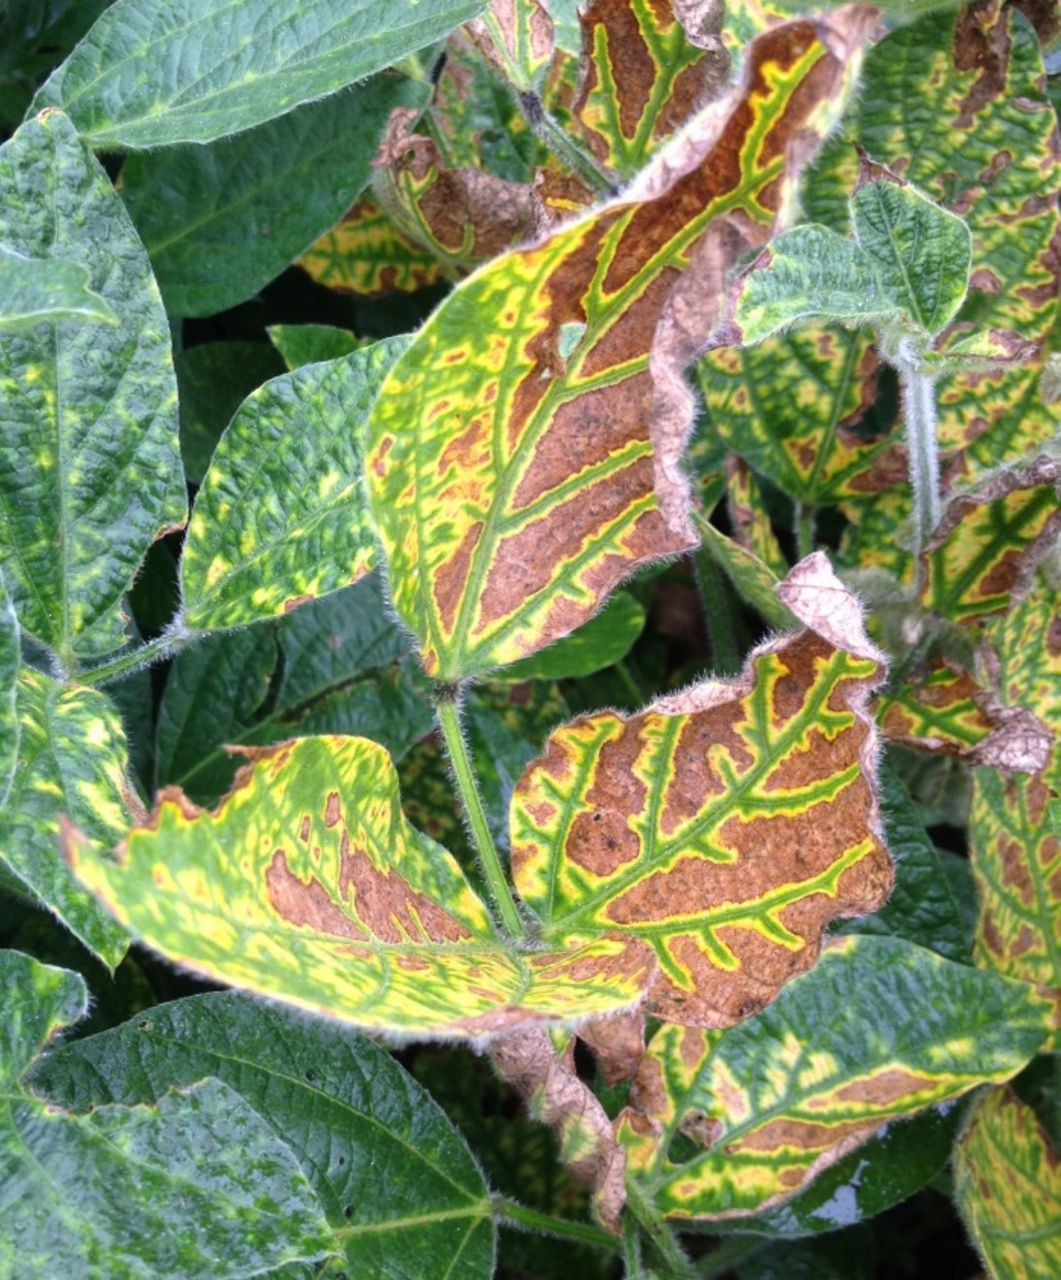 Foliar symptoms caused by sudden death syndrome